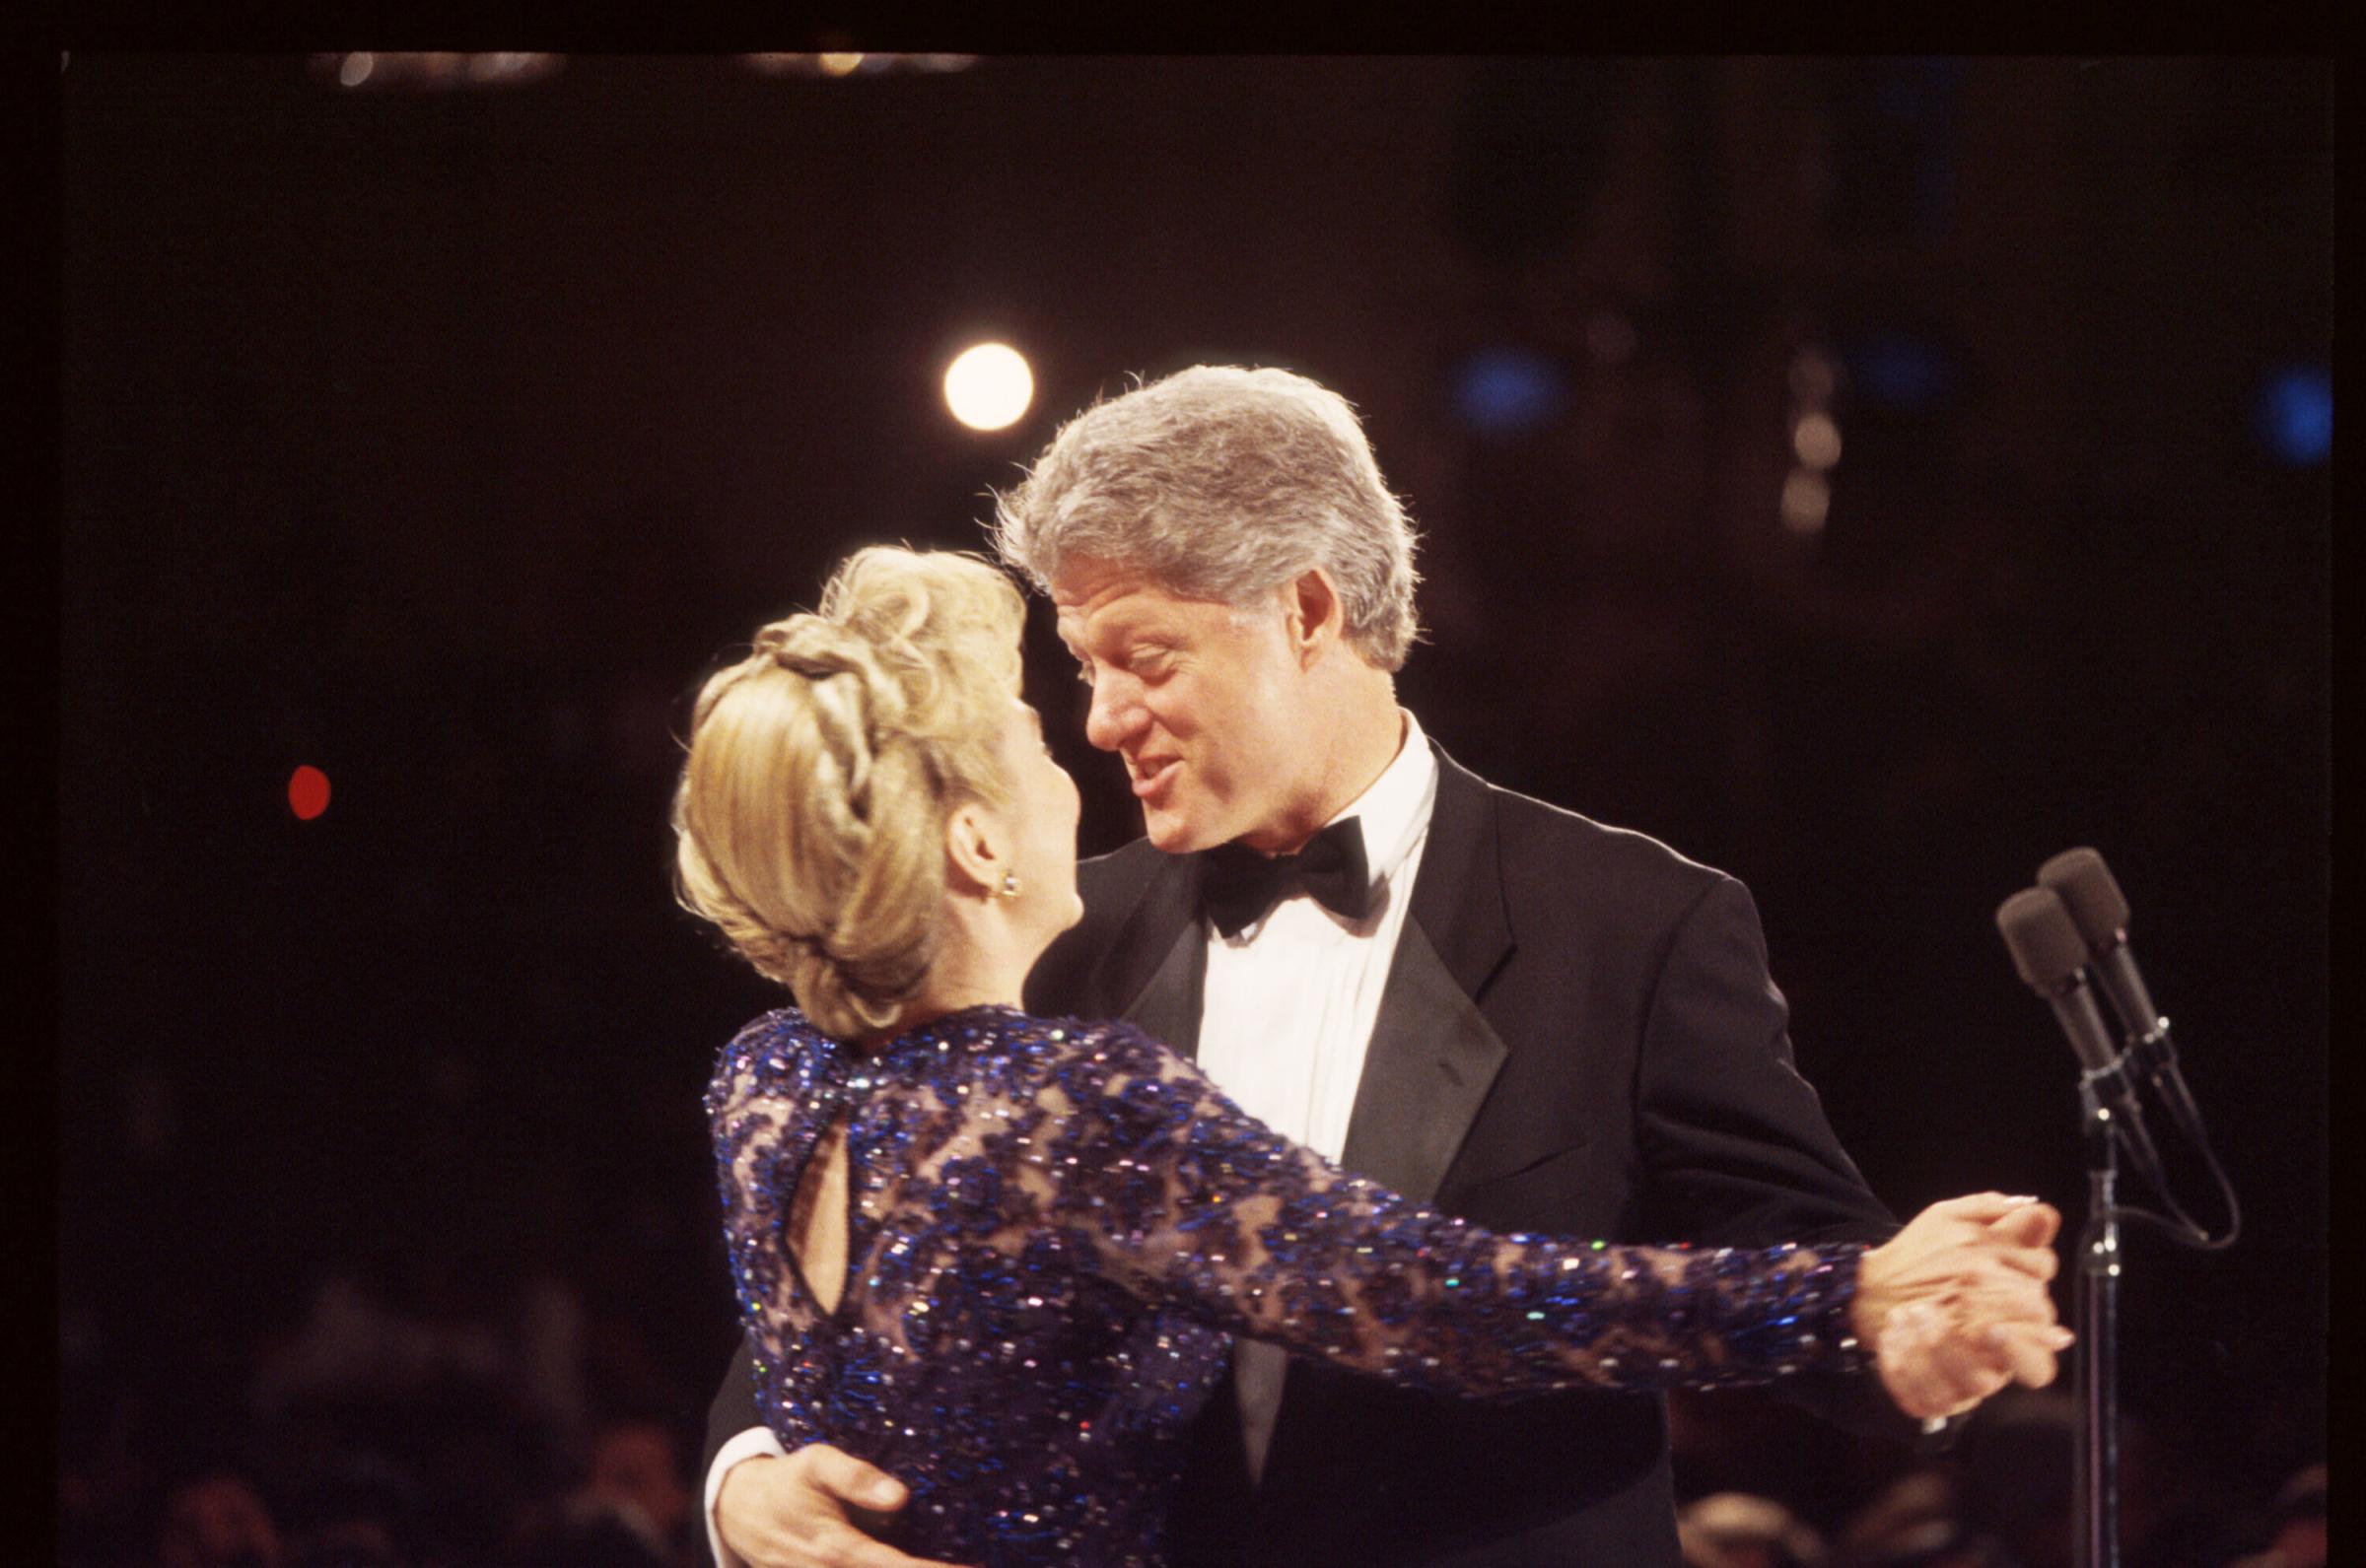 President Bill Clinton dances with First Lady Hillary Clinton on stage on Jan. 20, 1993 in Washington. Eleven inaugural balls were held on the same evening in honor of President Clinton's election.